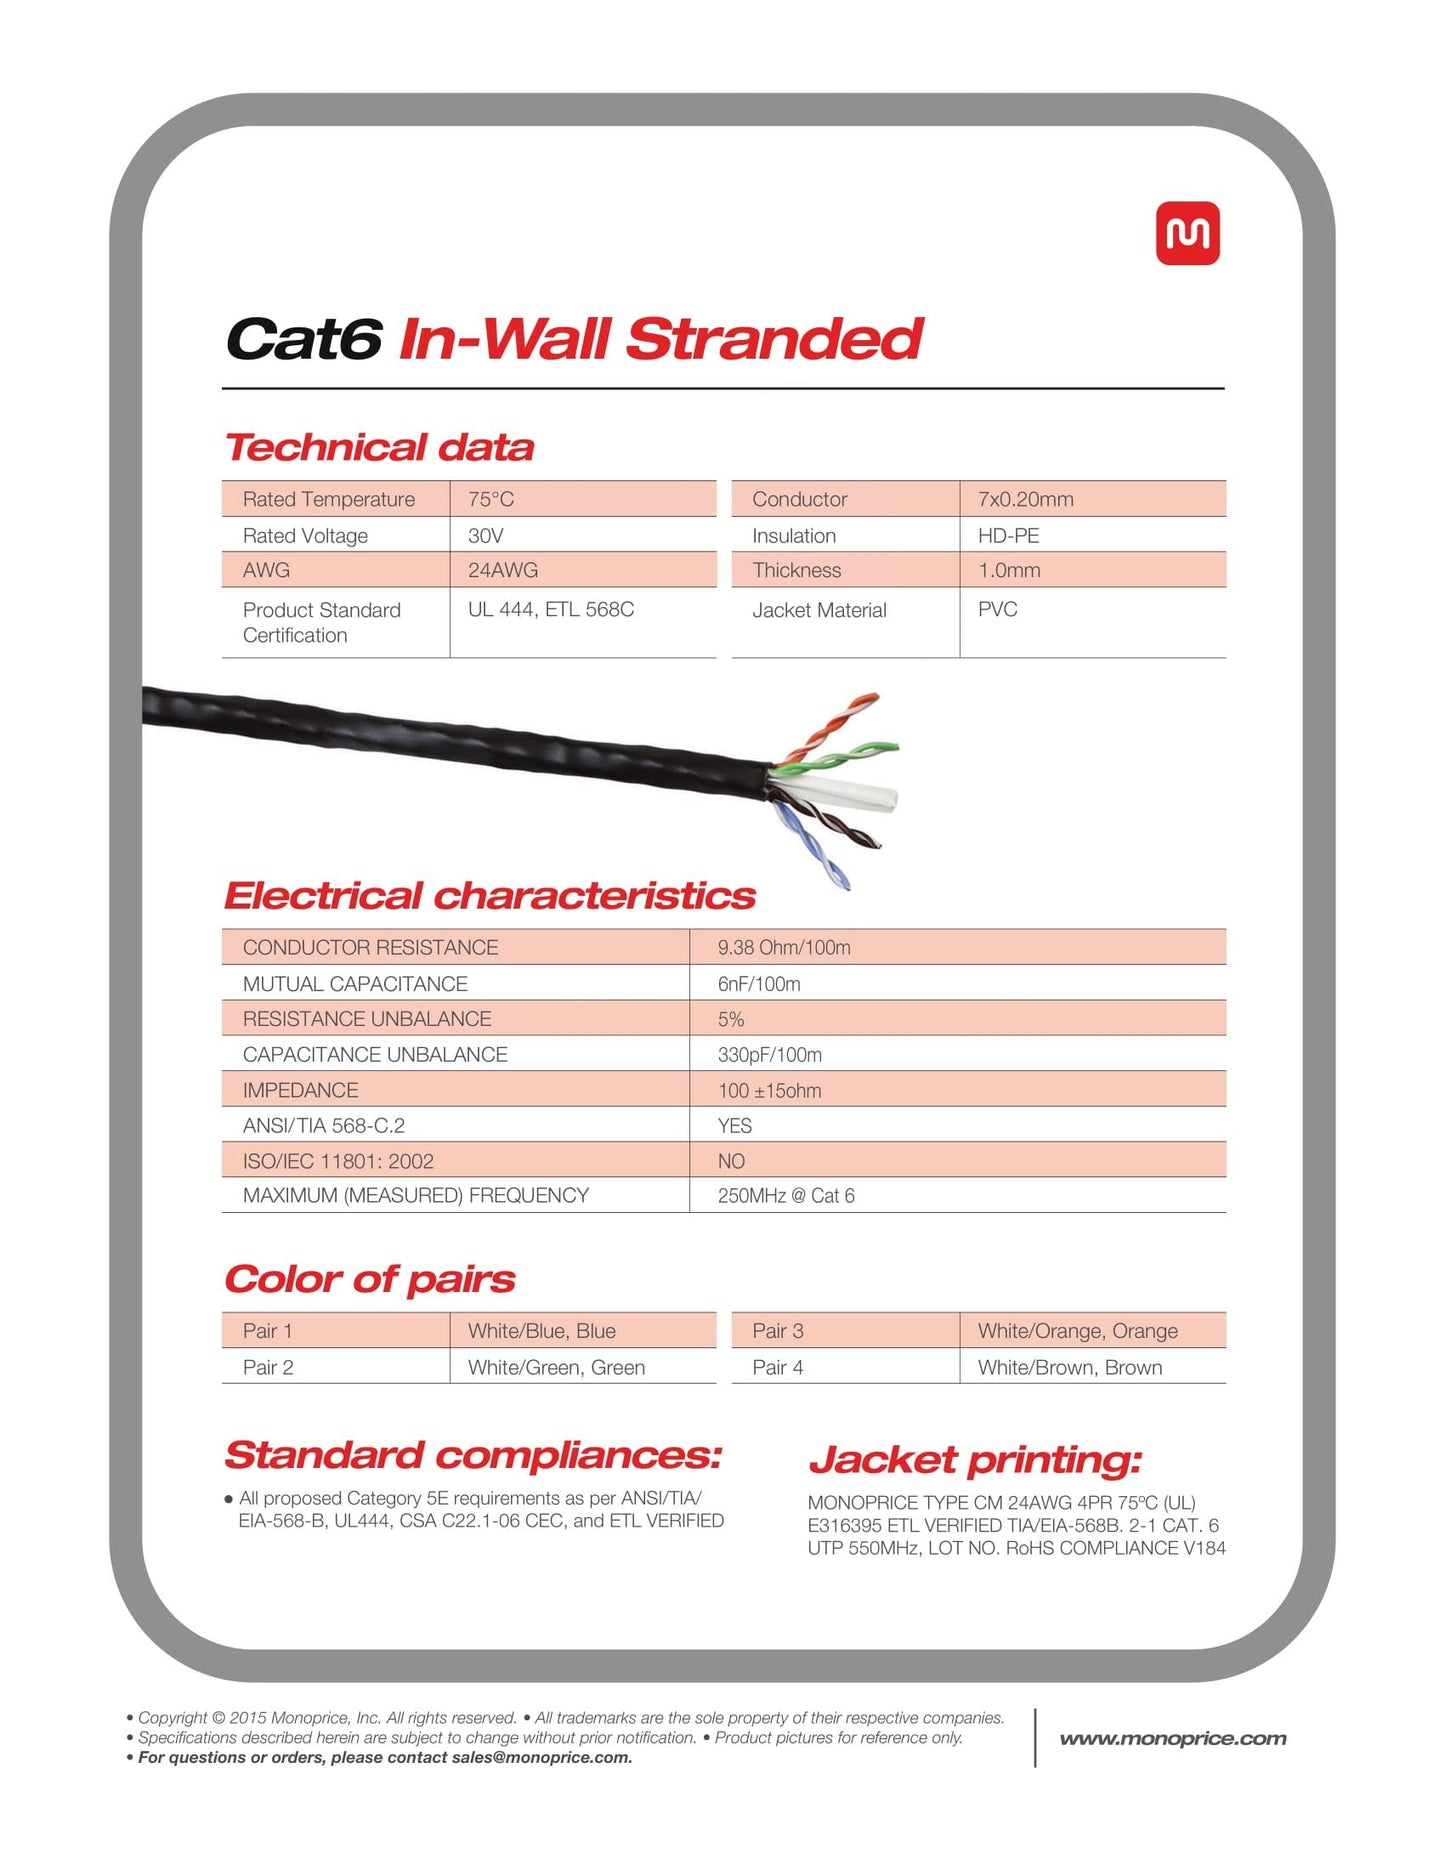 Cat6 Bulk Bare Copper Ethernet Cable, UTP, Stranded, In-Wall Rated (CMR), 550MHz, 24AWG (113677) White 250ft